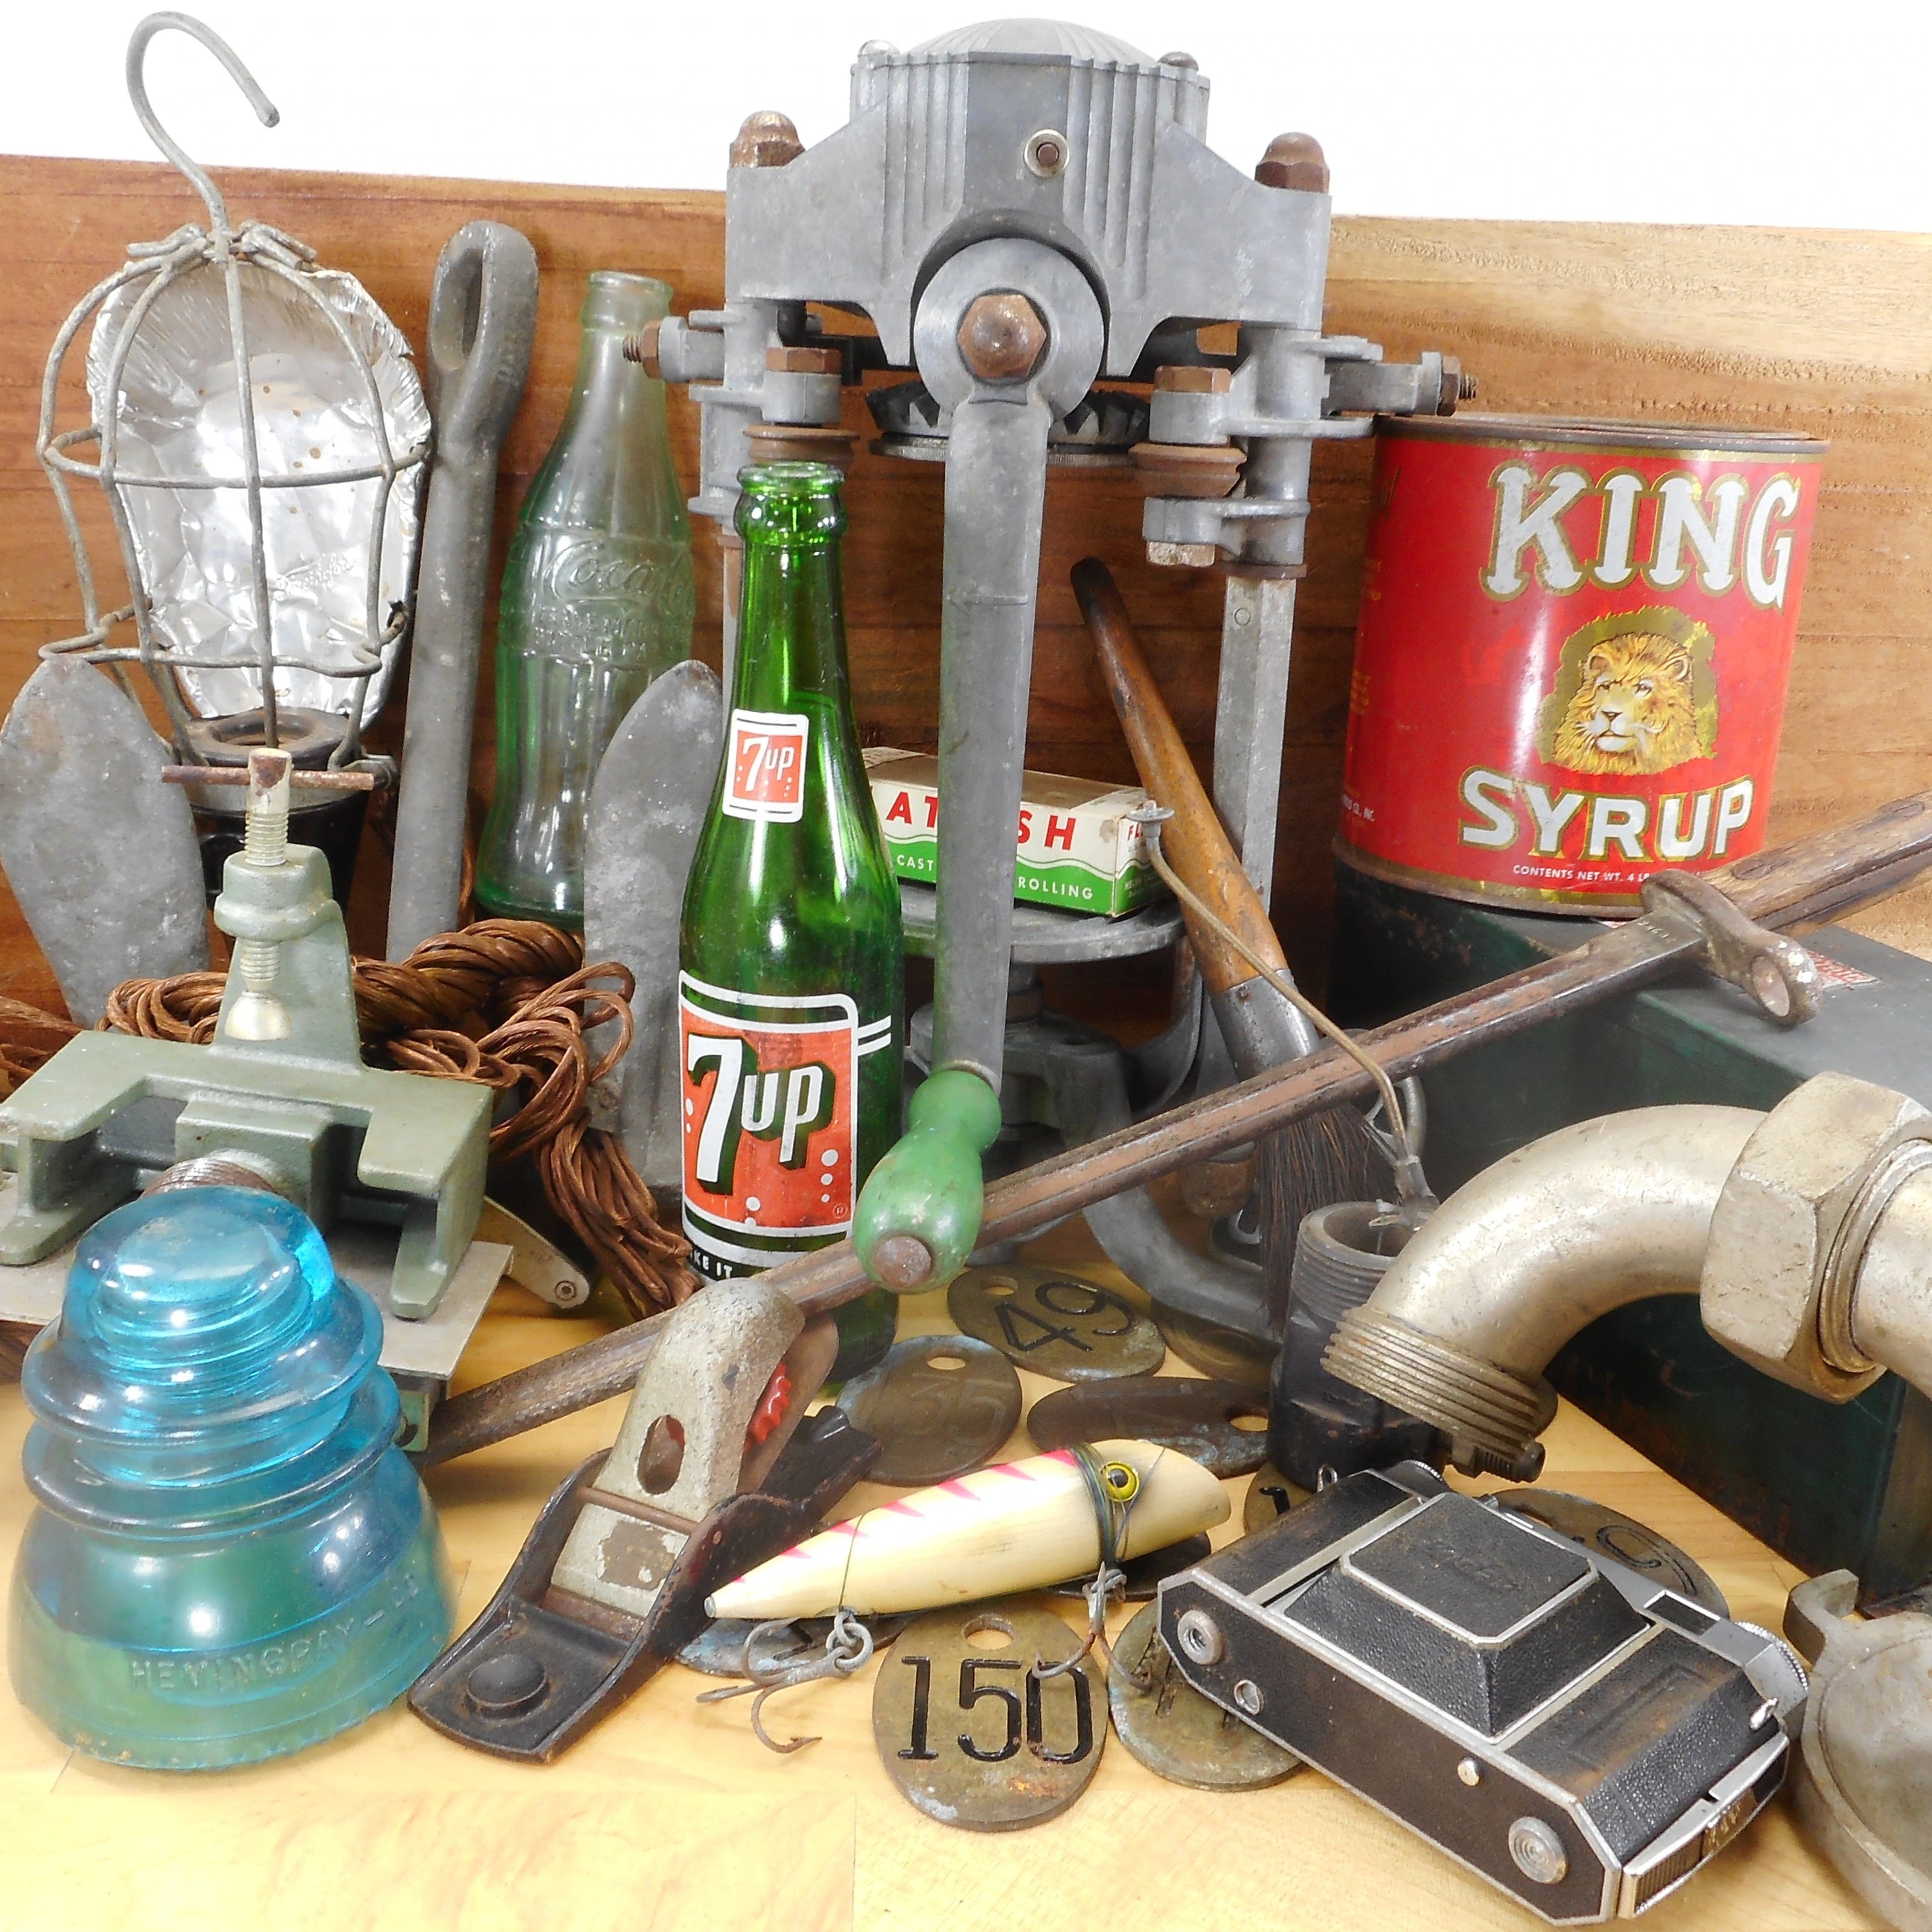 Antique & vintage primitive rustic wares, toys and collectibles - ephemera, books, industrial, hardware, tools, electronics, military, marine fishing, camping, old bottles, advertising cans signs, mad scientist, steam punk and plain old junk 